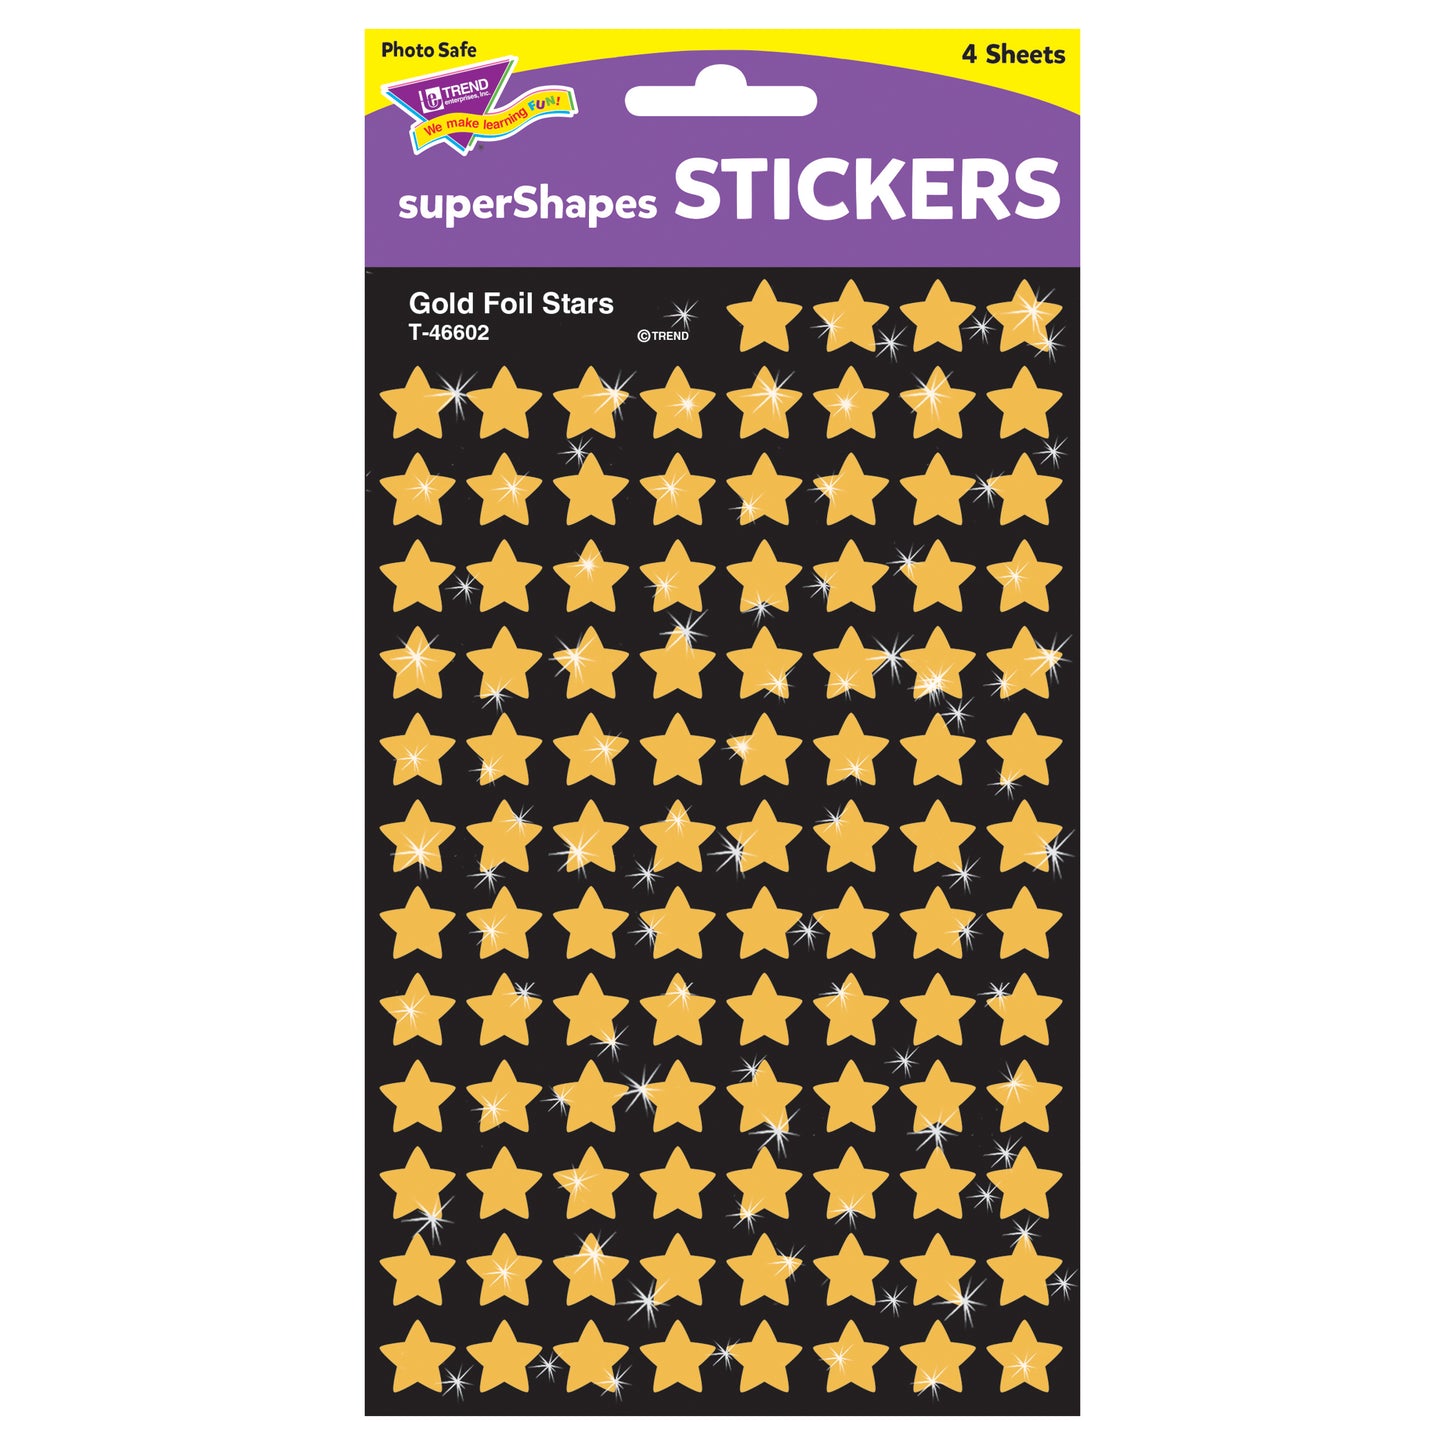 Gold Foil Stars superShapes Stickers, 400 Per Pack, 6 Packs